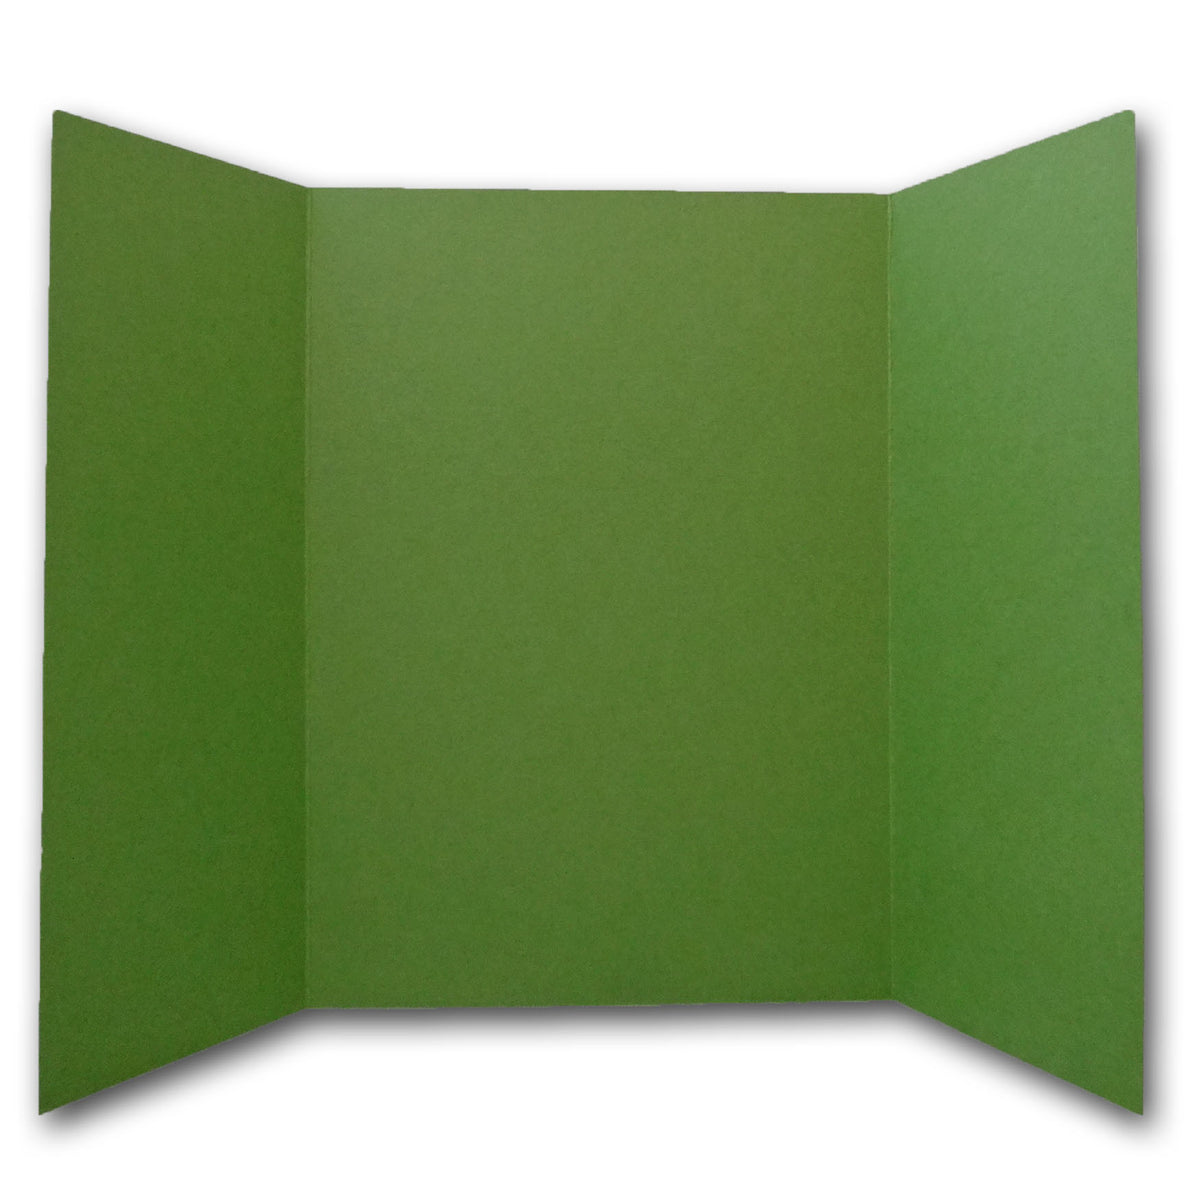 Green 5x7 Gate Fold Discount Card Stock for DIY Invitations